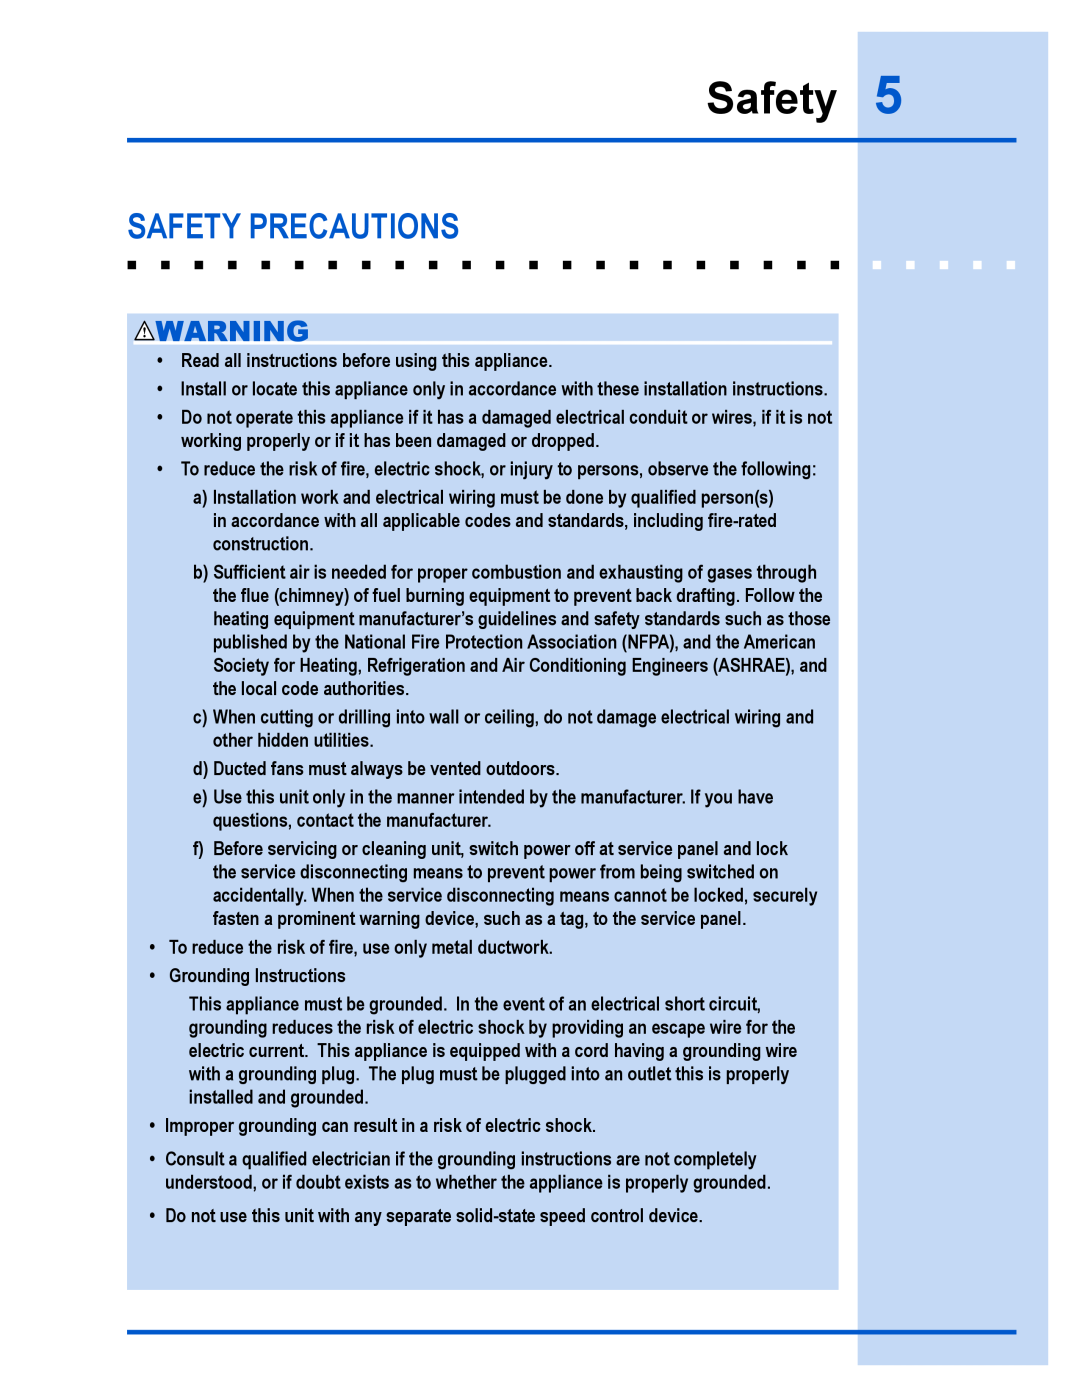 Electrolux E40PV100FS installation instructions Safety Precautions 